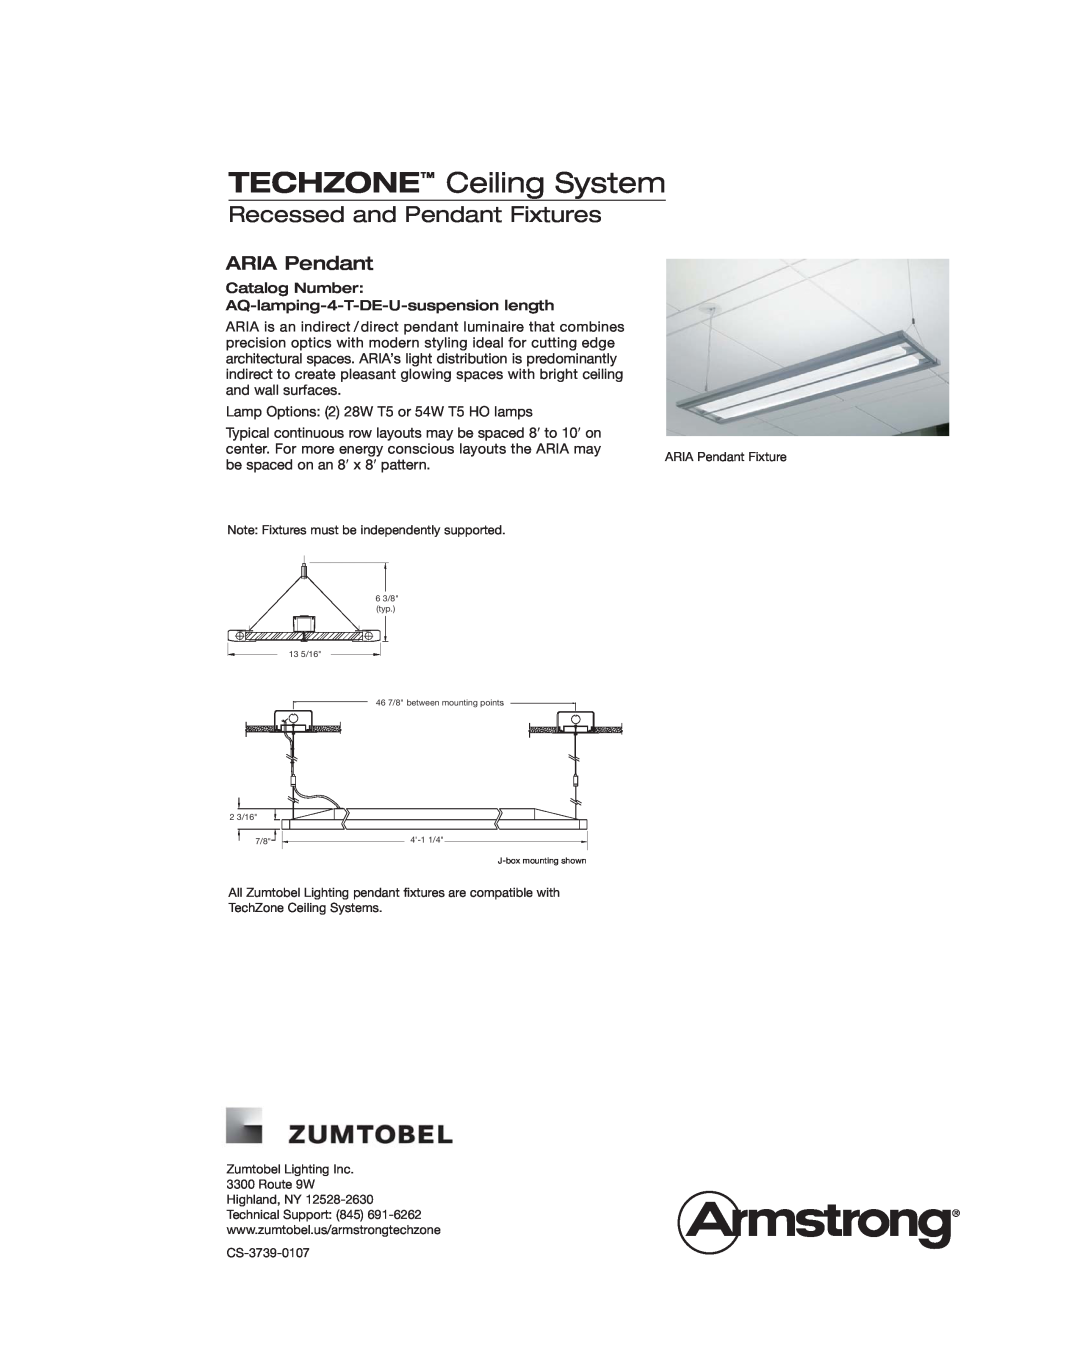 Armstrong World Industries Ceiling Lighting System ARIA Pendant, TECHZONE Ceiling System, Recessed and Pendant Fixtures 